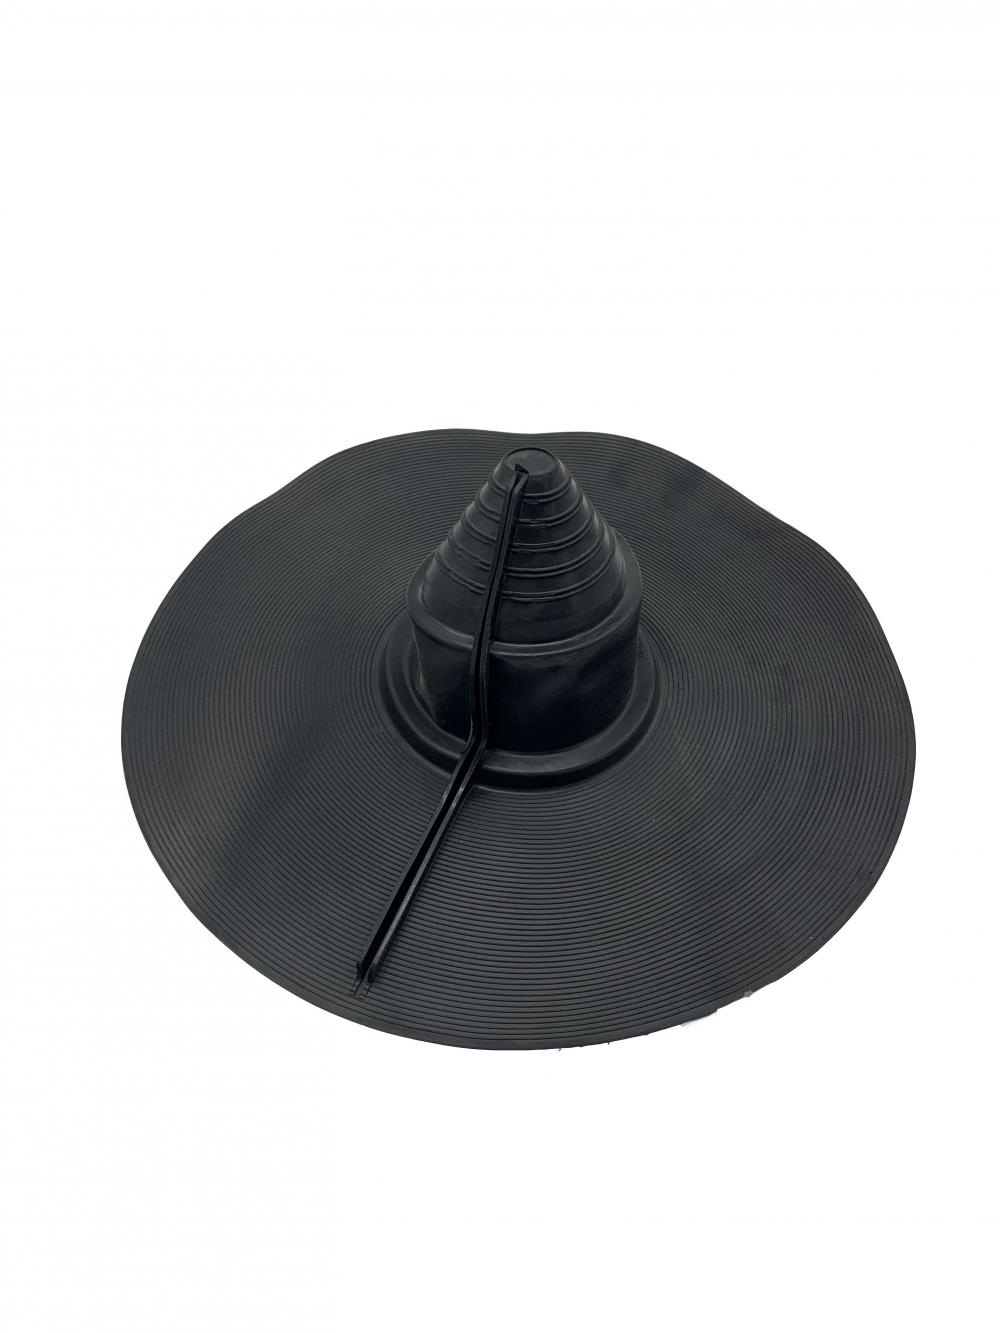 Soft Big Round Base Roof Flashing For Pipes